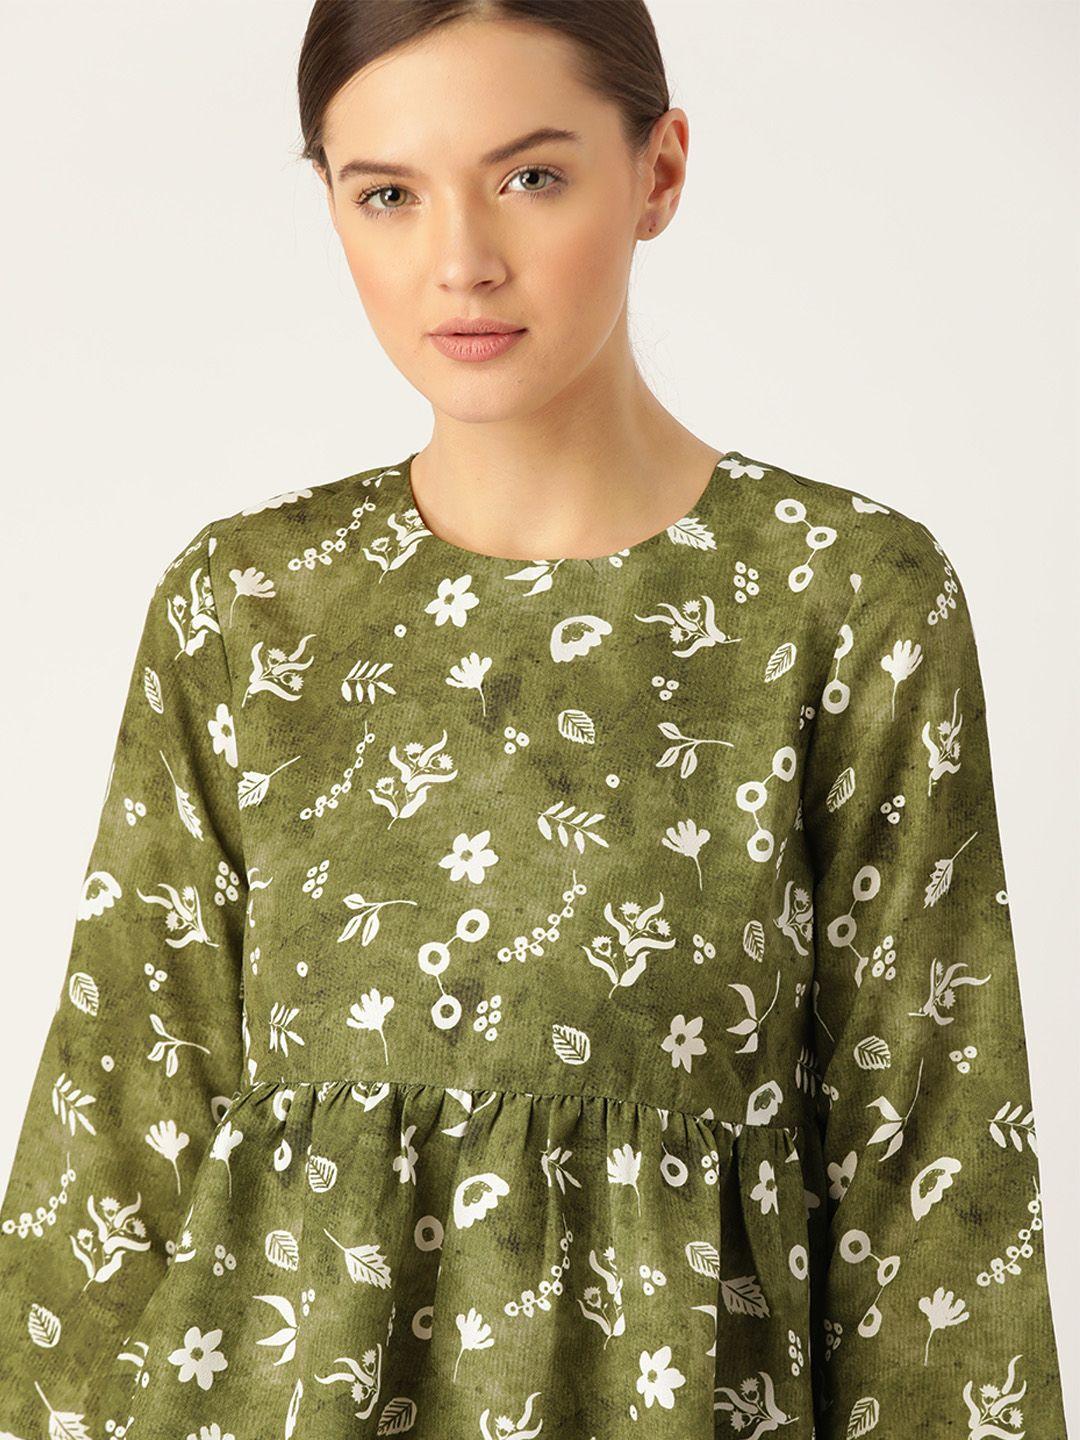 ether-olive-green-&-white-floral-print-a-line-top